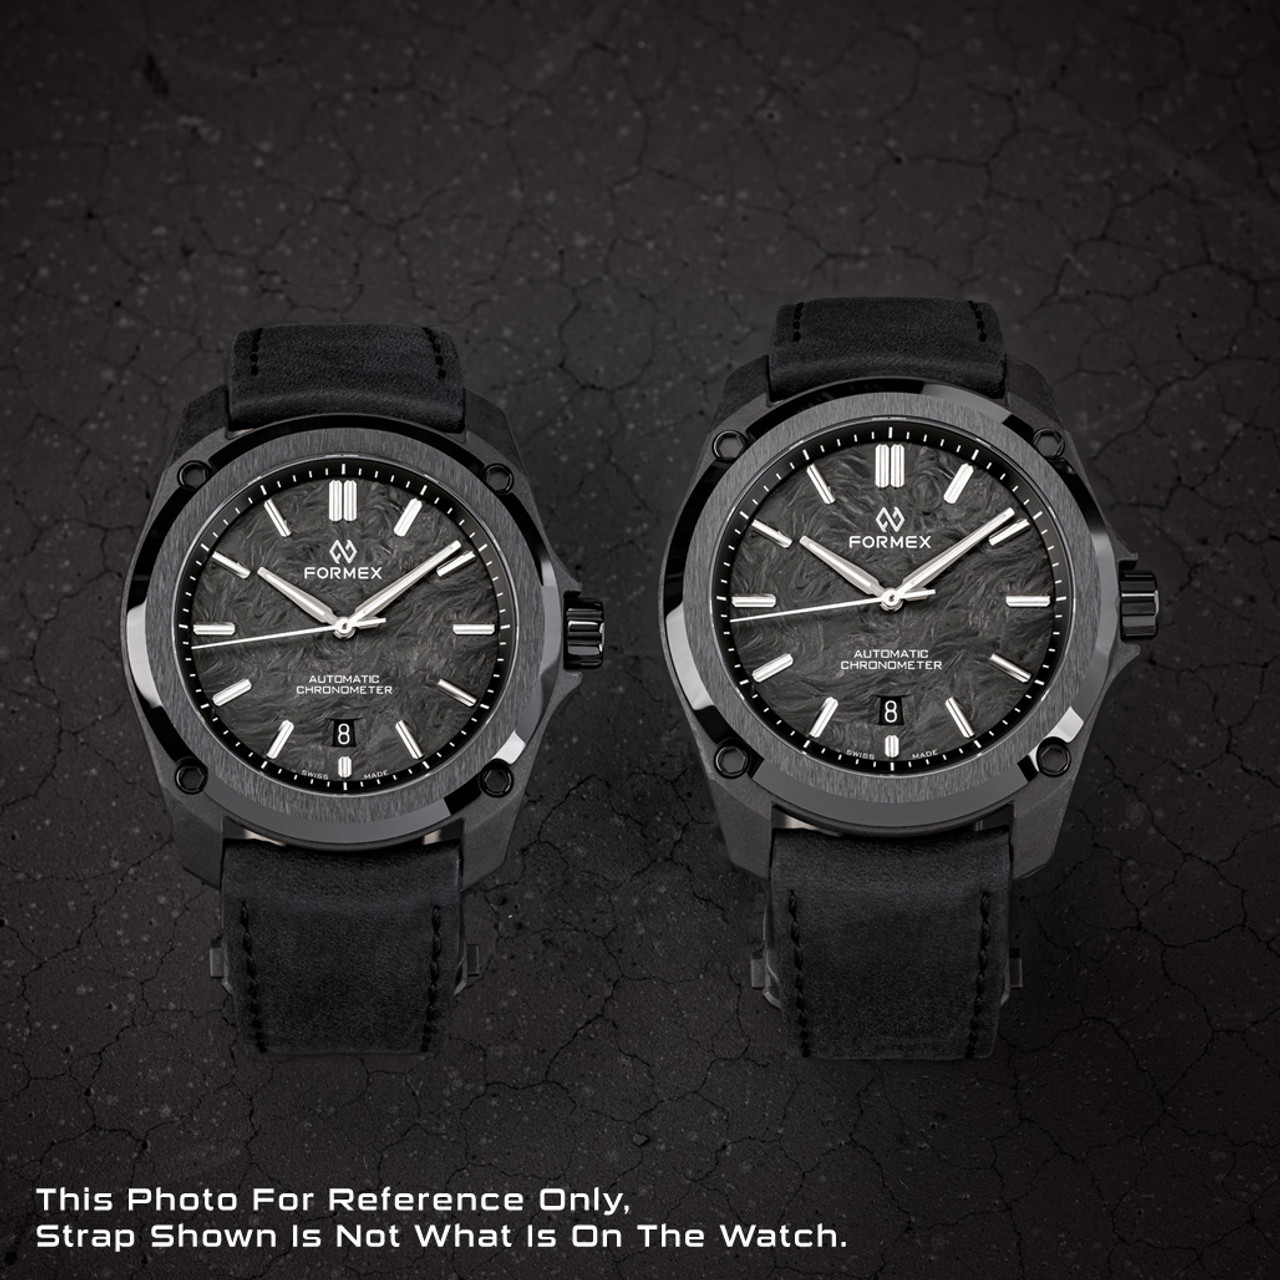 Formex Essence Leggera FortyOne (41mm) COSC Automatic Carbon Case Watch  with Mamba Green Dial #0331.4.6300.833